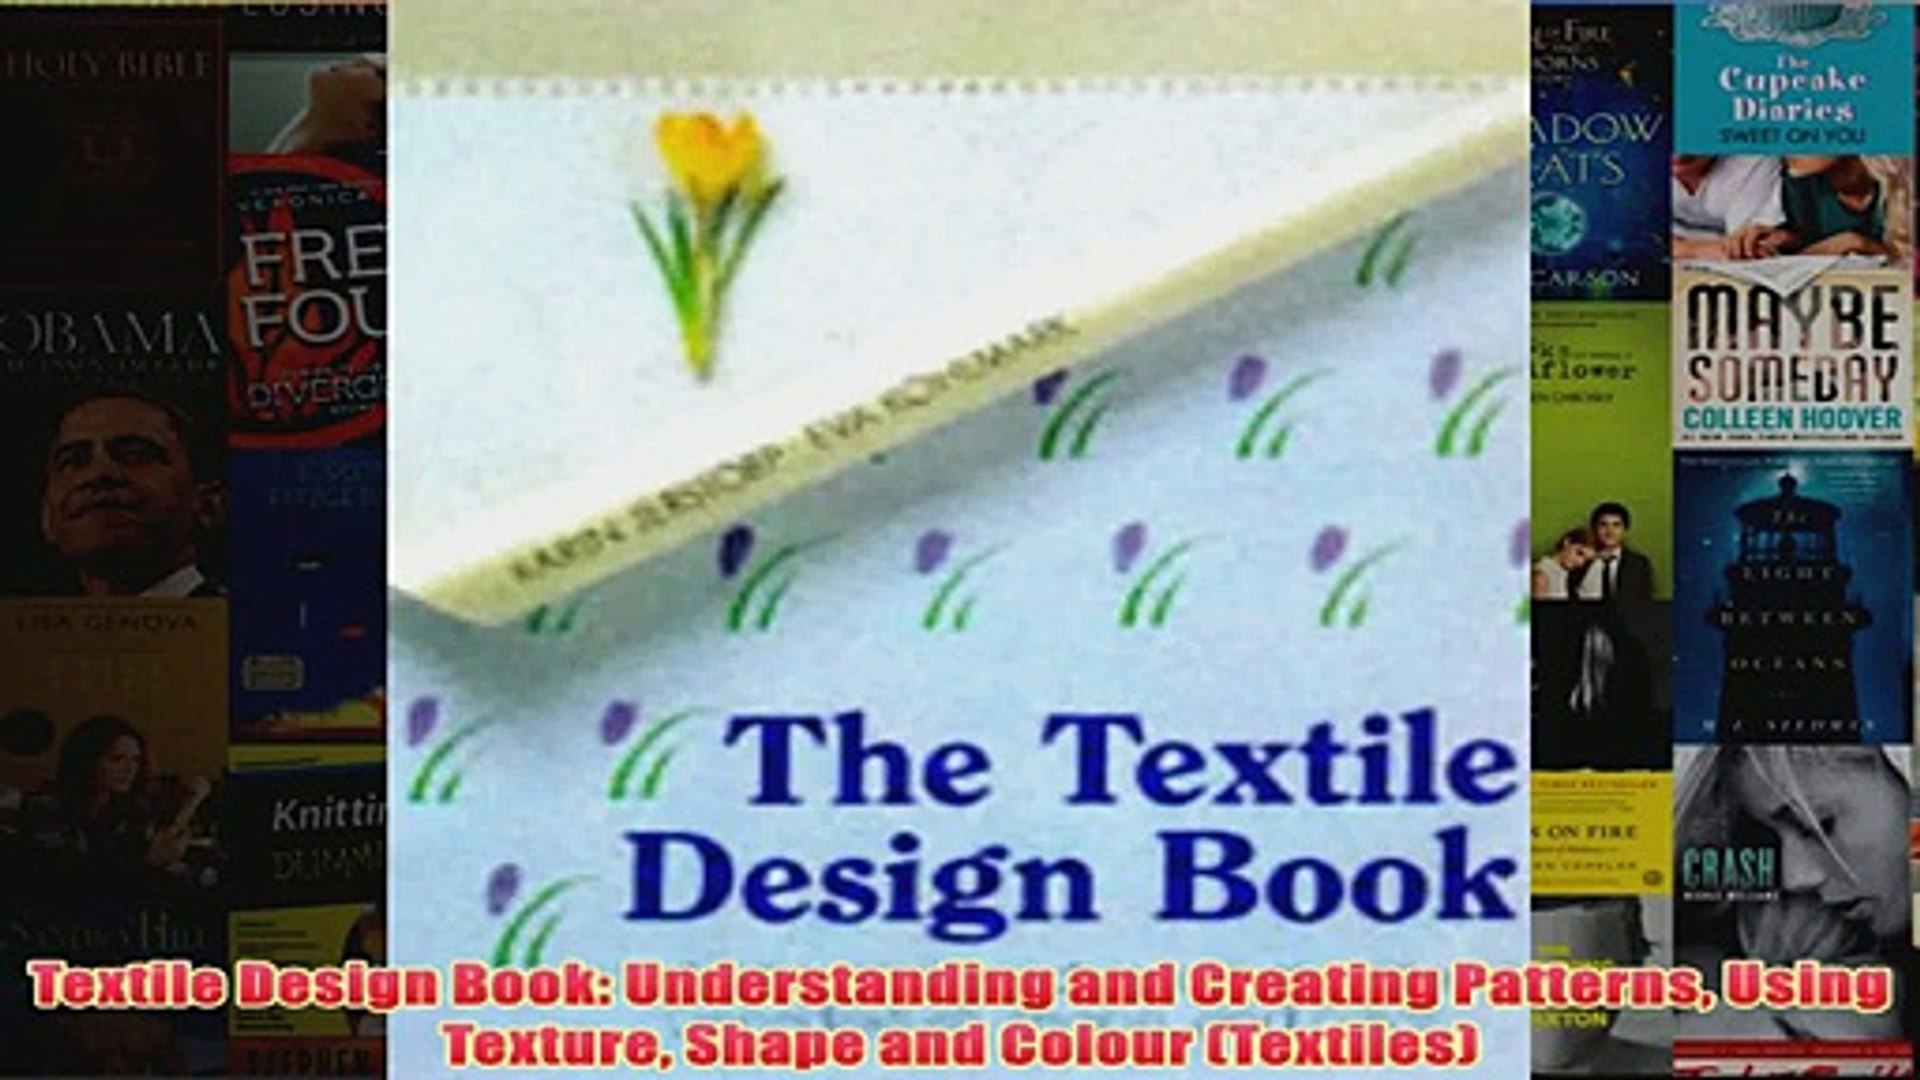 Textile Design Book Understanding and Creating Patterns Using Texture Shape and Colour